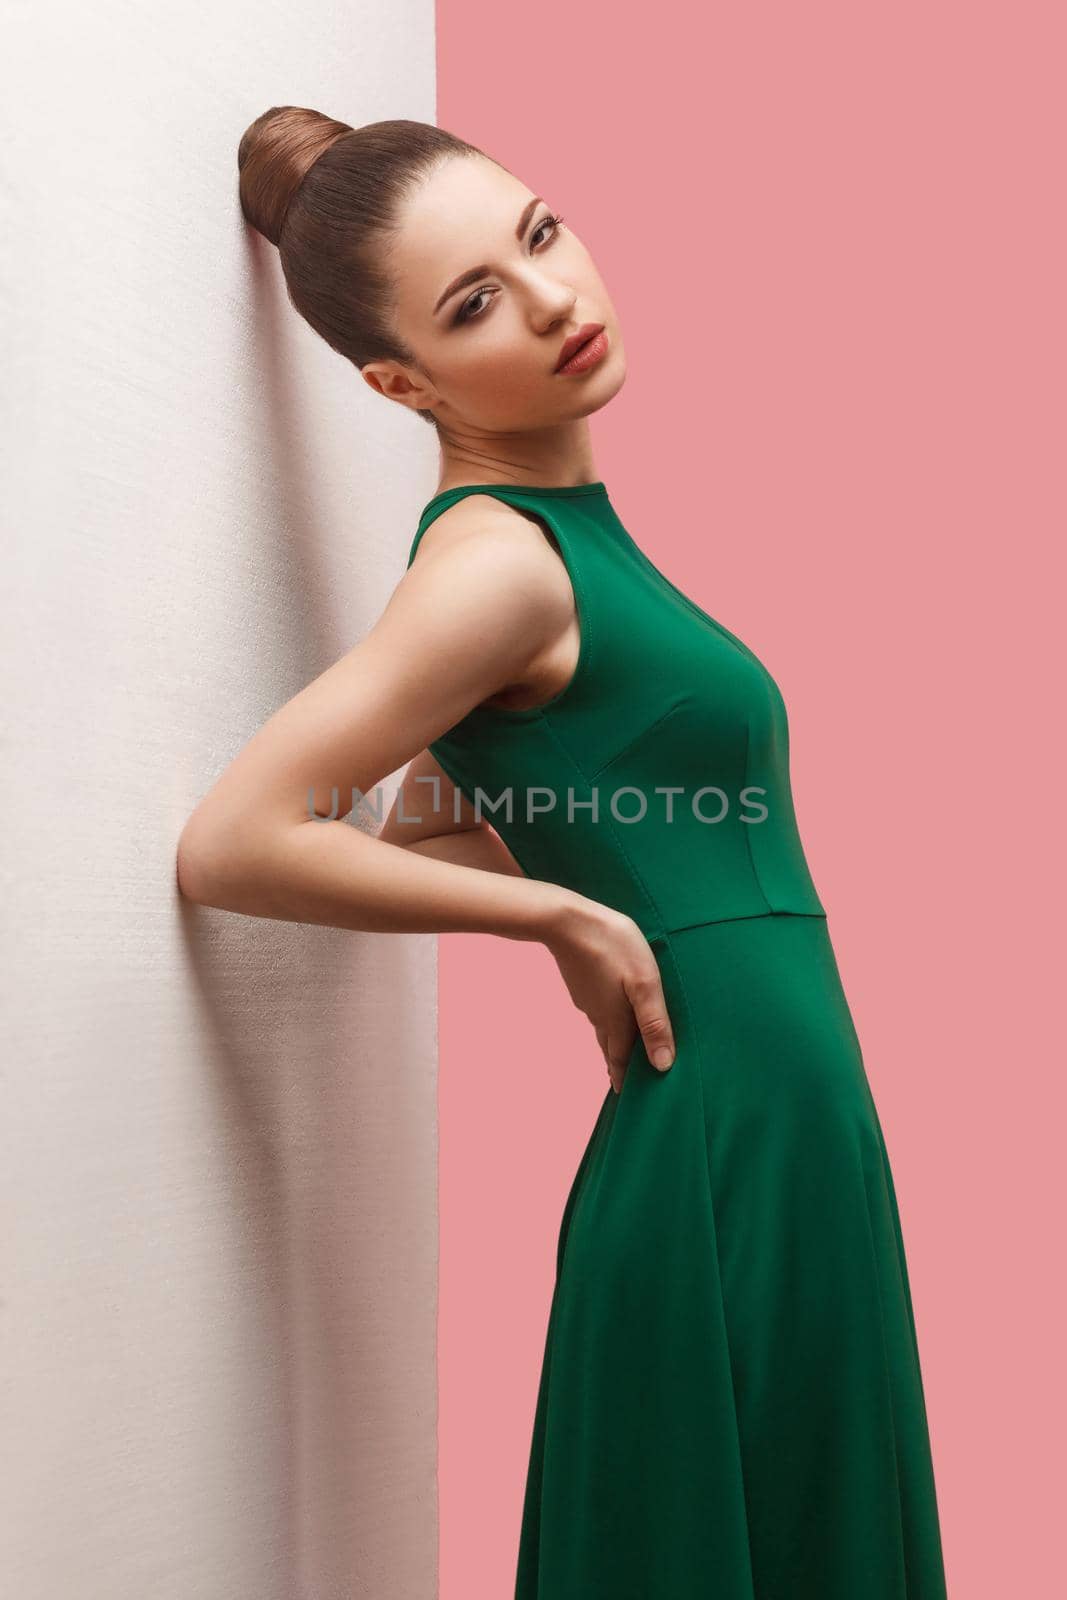 Beauty concept of young beautiful female model in green dress on pink background. by Khosro1